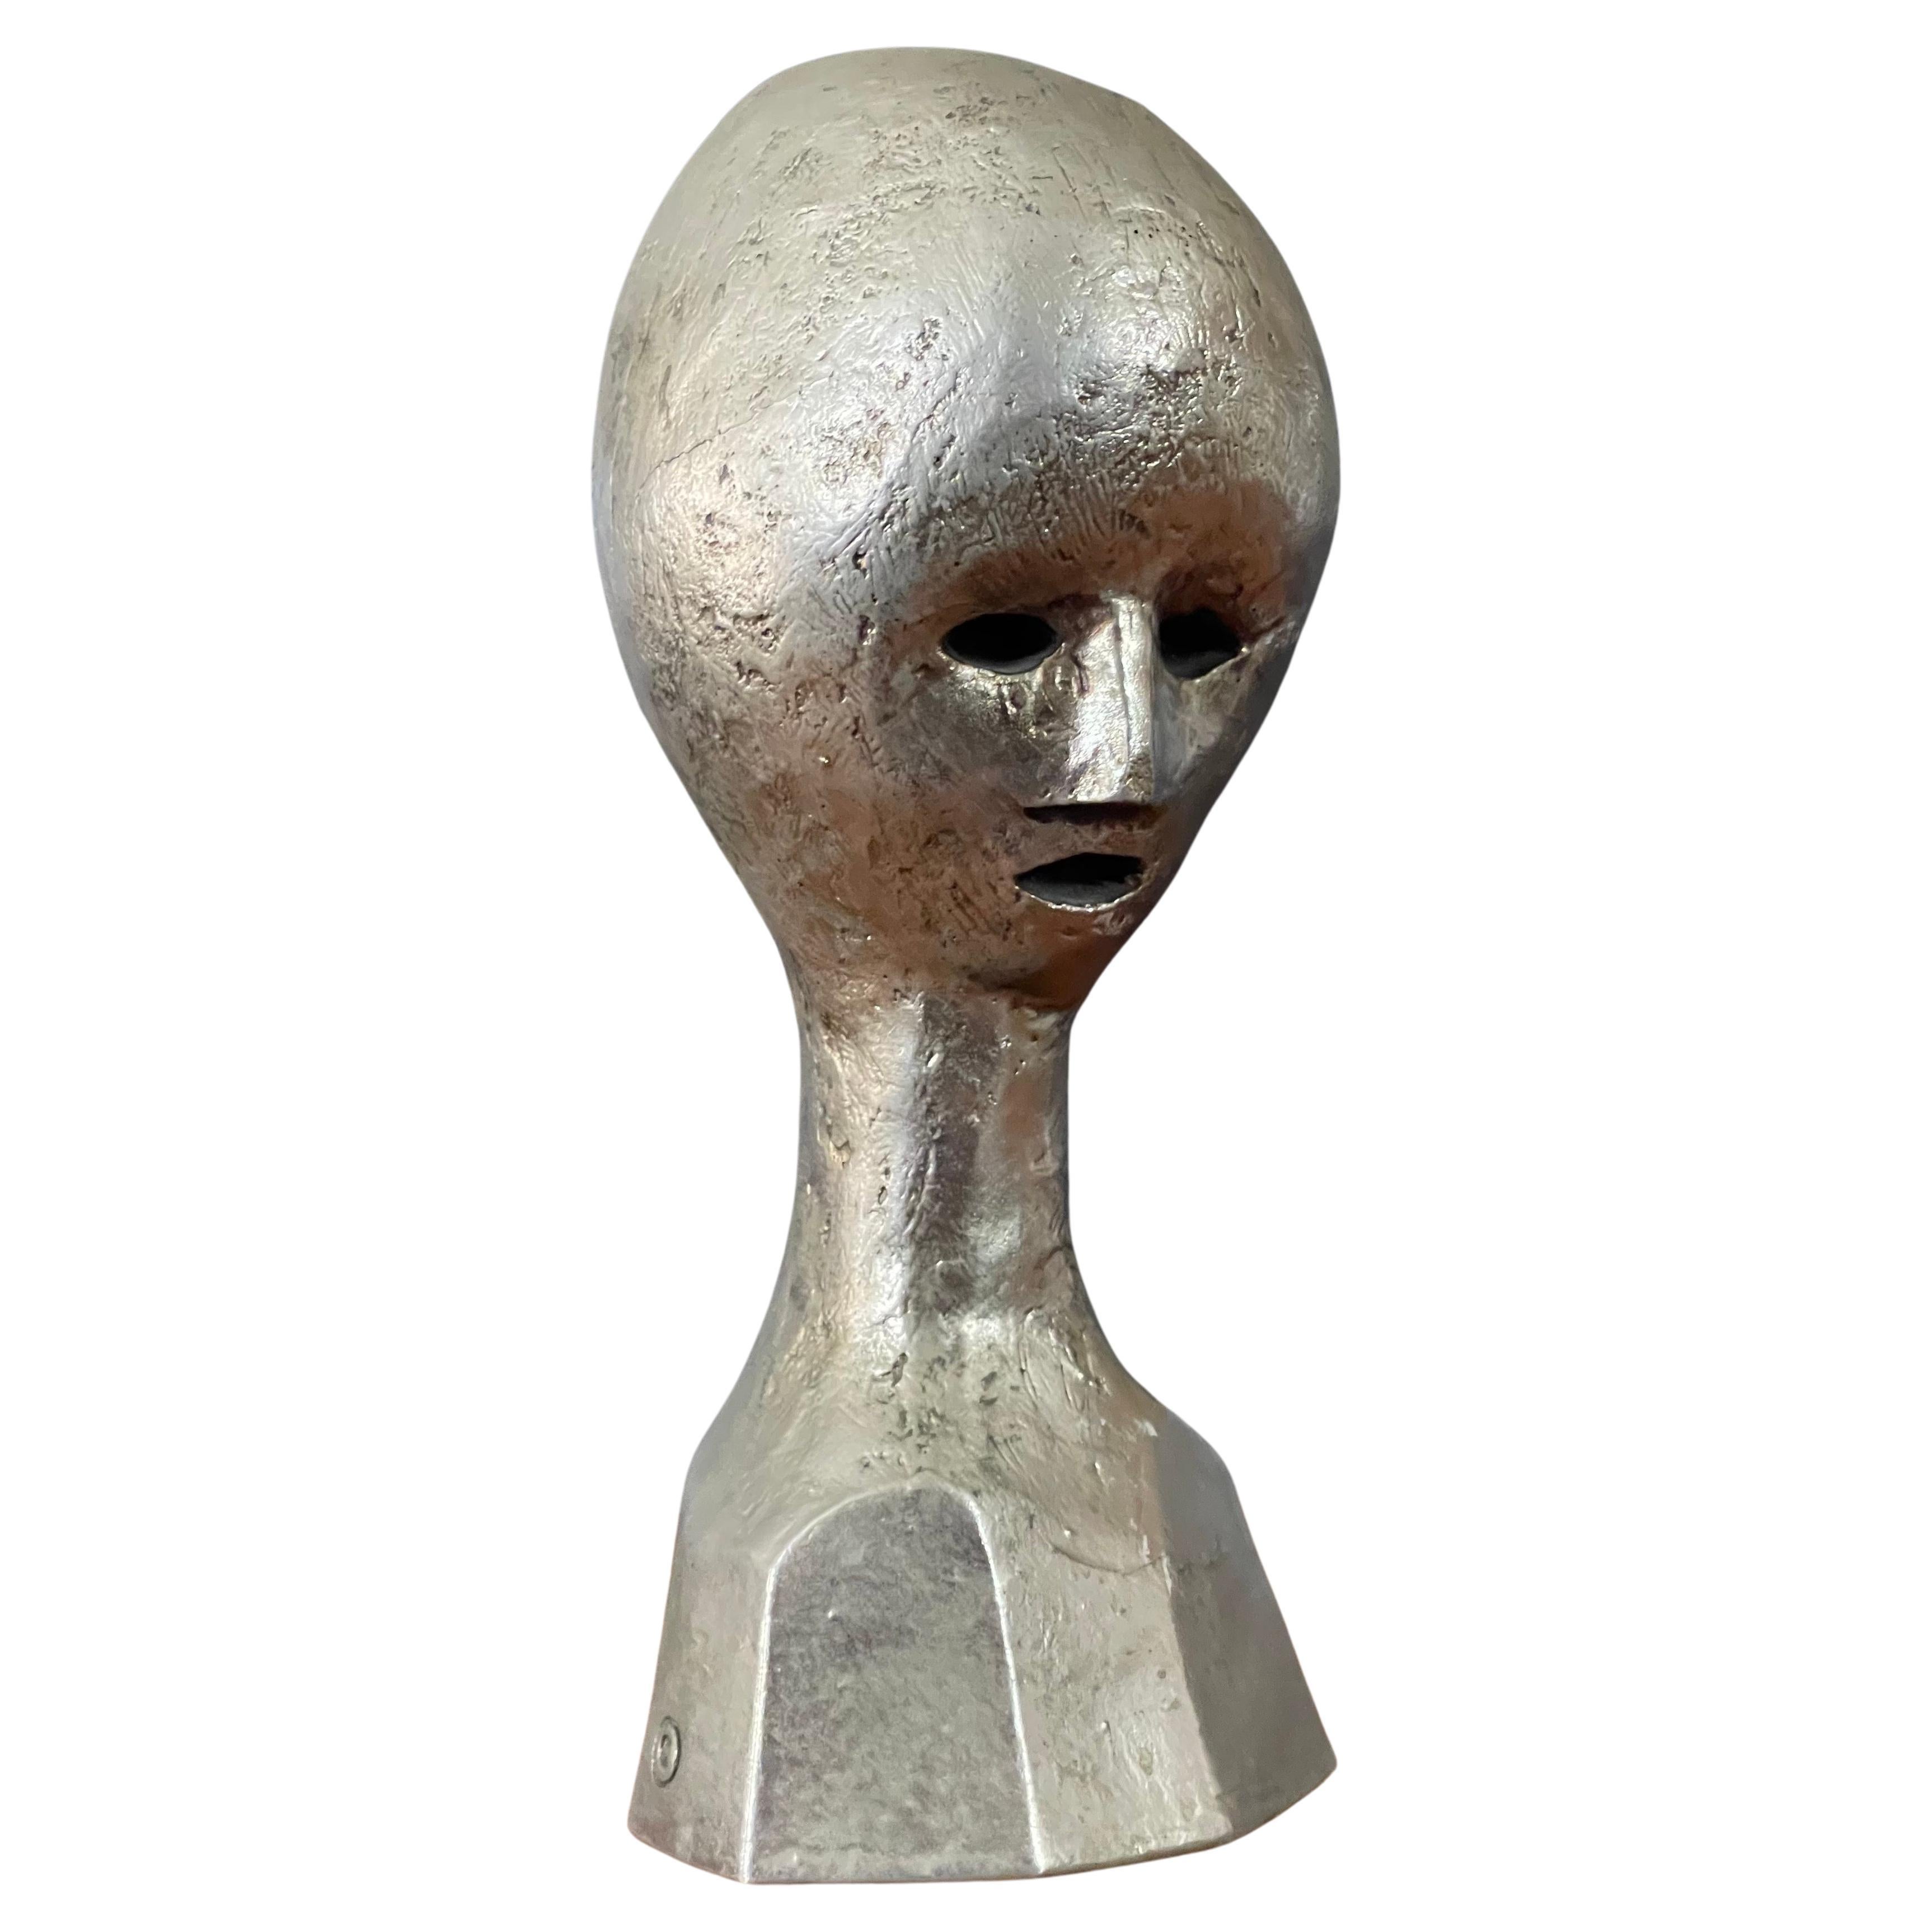 A very cool MCM modernist alien bust / head sculpture by Andre Minaux, circa 1970s. This rare sculpture by noted French designer Andre Minaux is made of cast metal over bronze with a silver wash finish and is in very good vintage condition with no